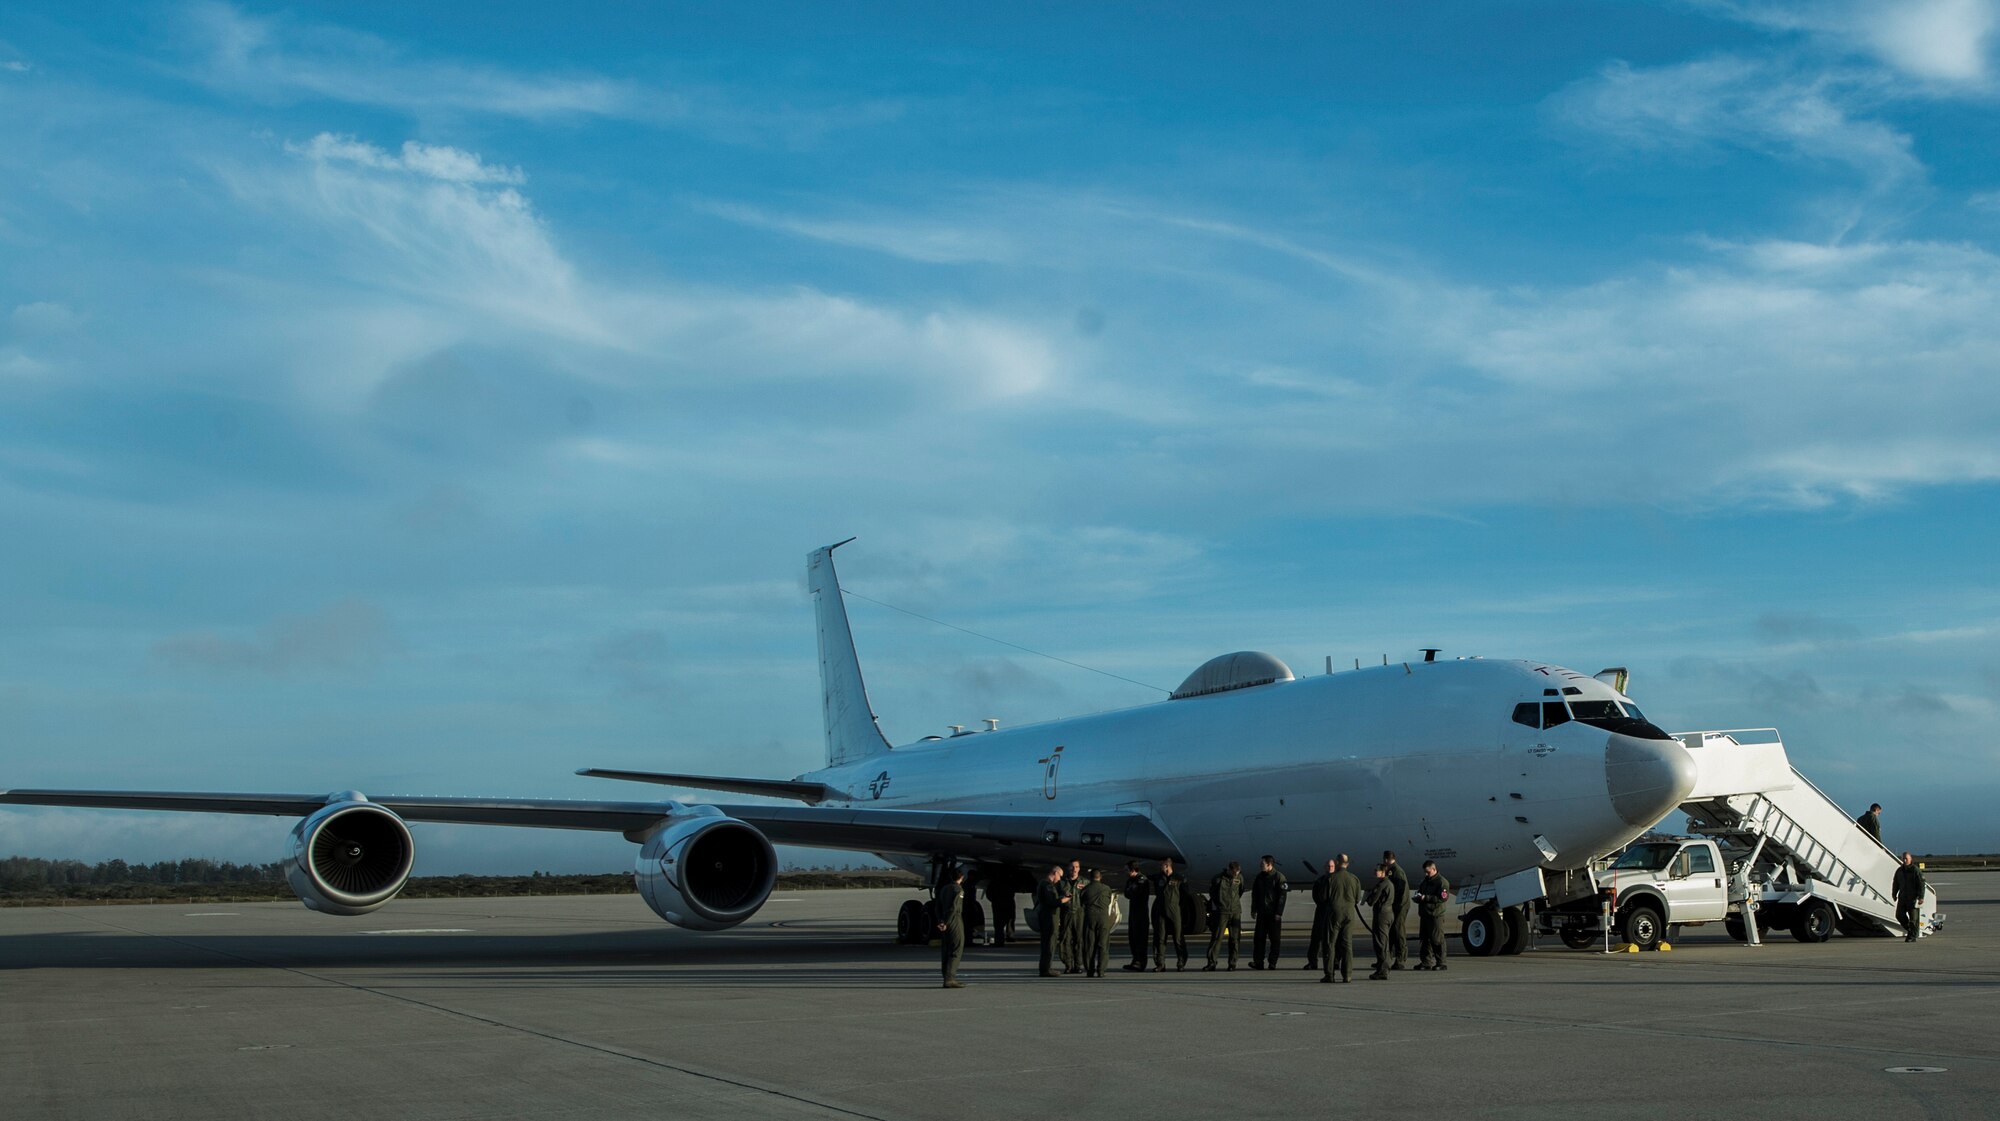 U.S. Air Force Airmen from various units within the 20th Air Force, gather outside of a U.S. Navy E-6B Mercury for a mission briefing before Glory Trip 220 at Vandenberg Air Force Base, Calif., April 25, 2017. Glory Trip is an exercise designed to bolster the readiness of U.S. Air Force missiliers to launch Intercontinental Ballistic Missiles (ICBM) at a moment’s notice. (U.S. Air Force photo by Airman 1st Class Keifer Bowes)